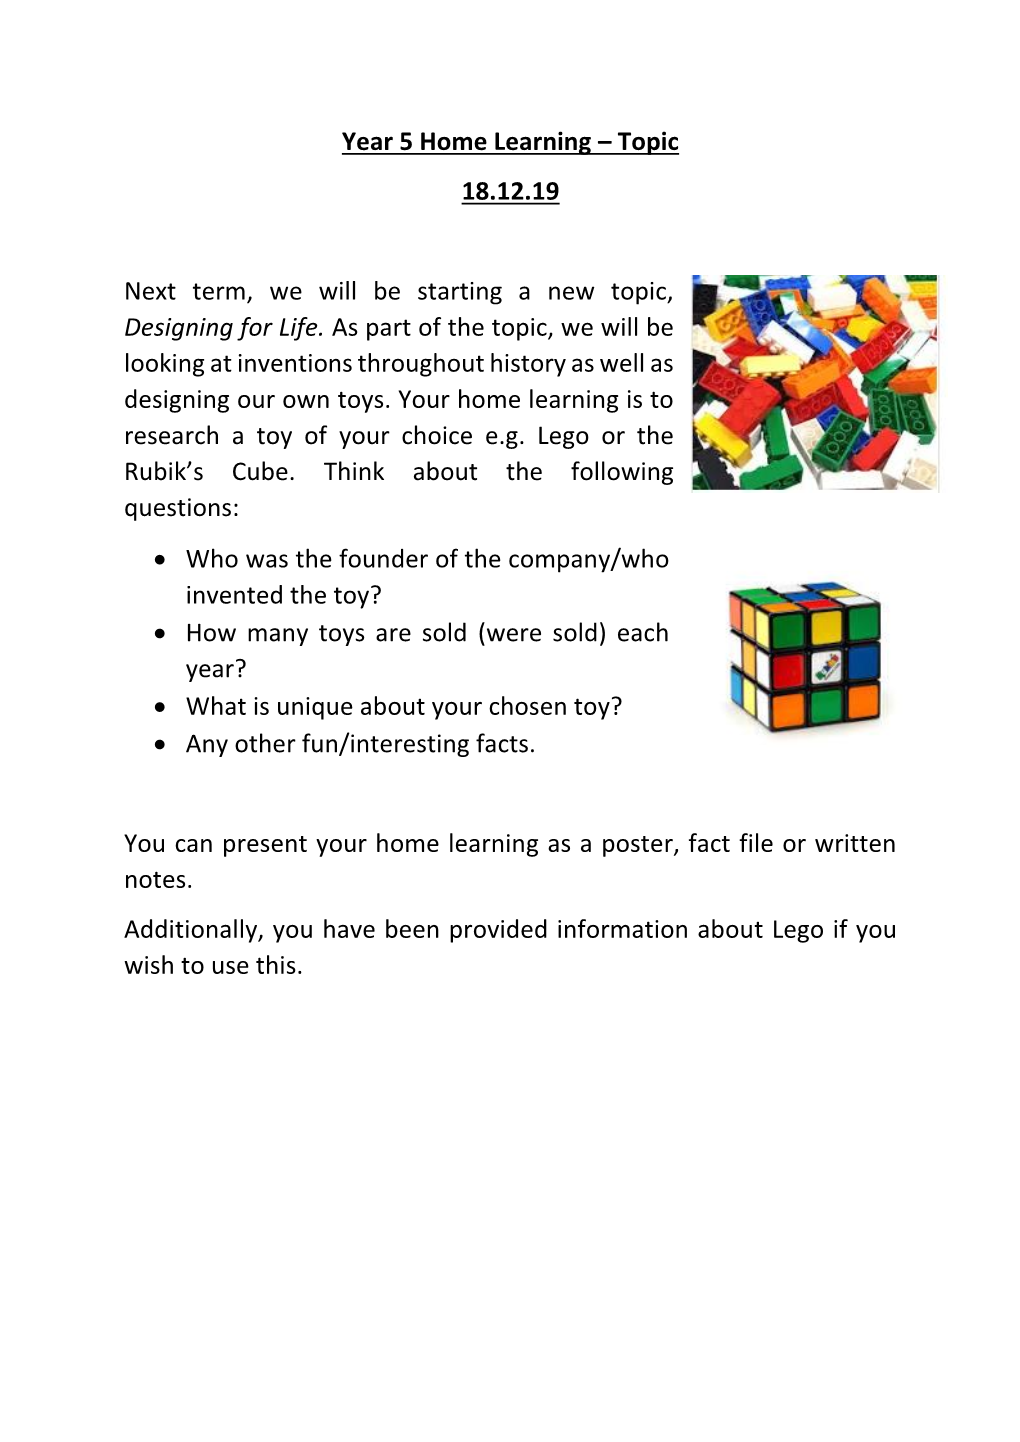 Year 5 Home Learning – Topic 18.12.19 Next Term, We Will Be